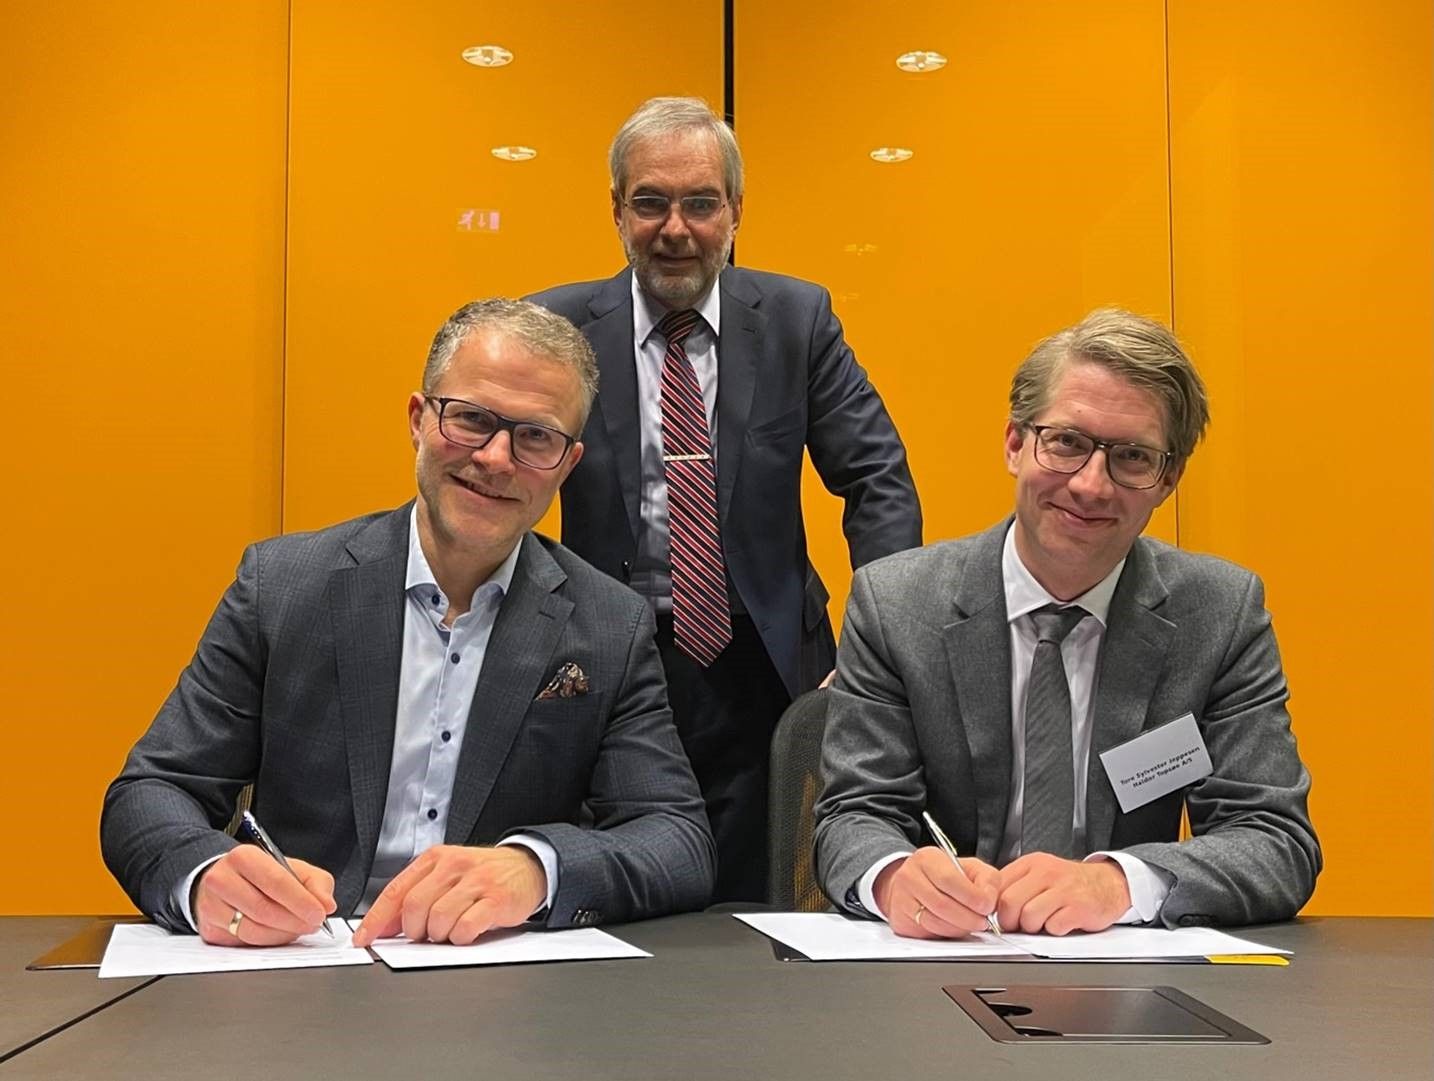 Siggi Ólason, CEO at Green Fuel, and Tore Sylvester Jeppesen, Senior Vice President at Topsoe, signs the MoU.